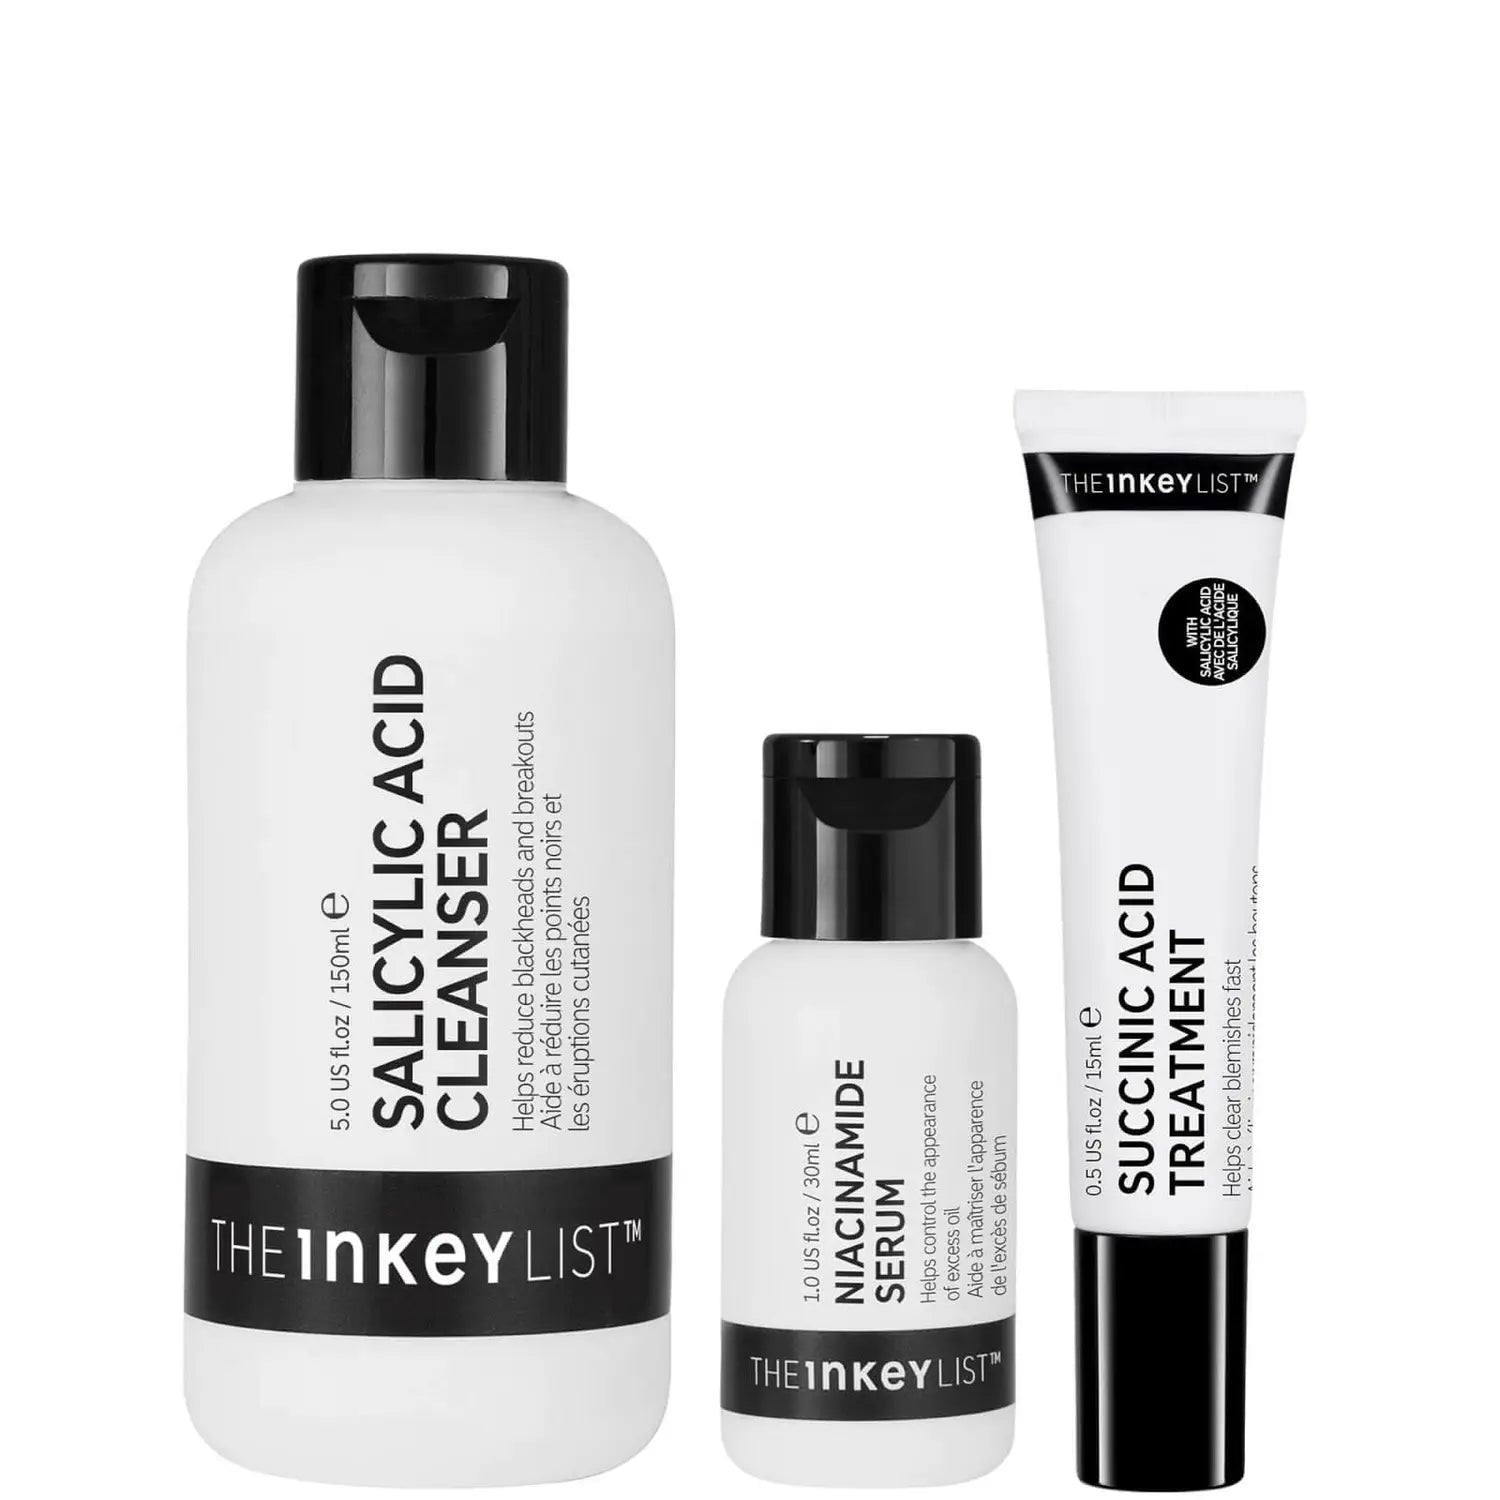 The Inkey List Breakout 101, products